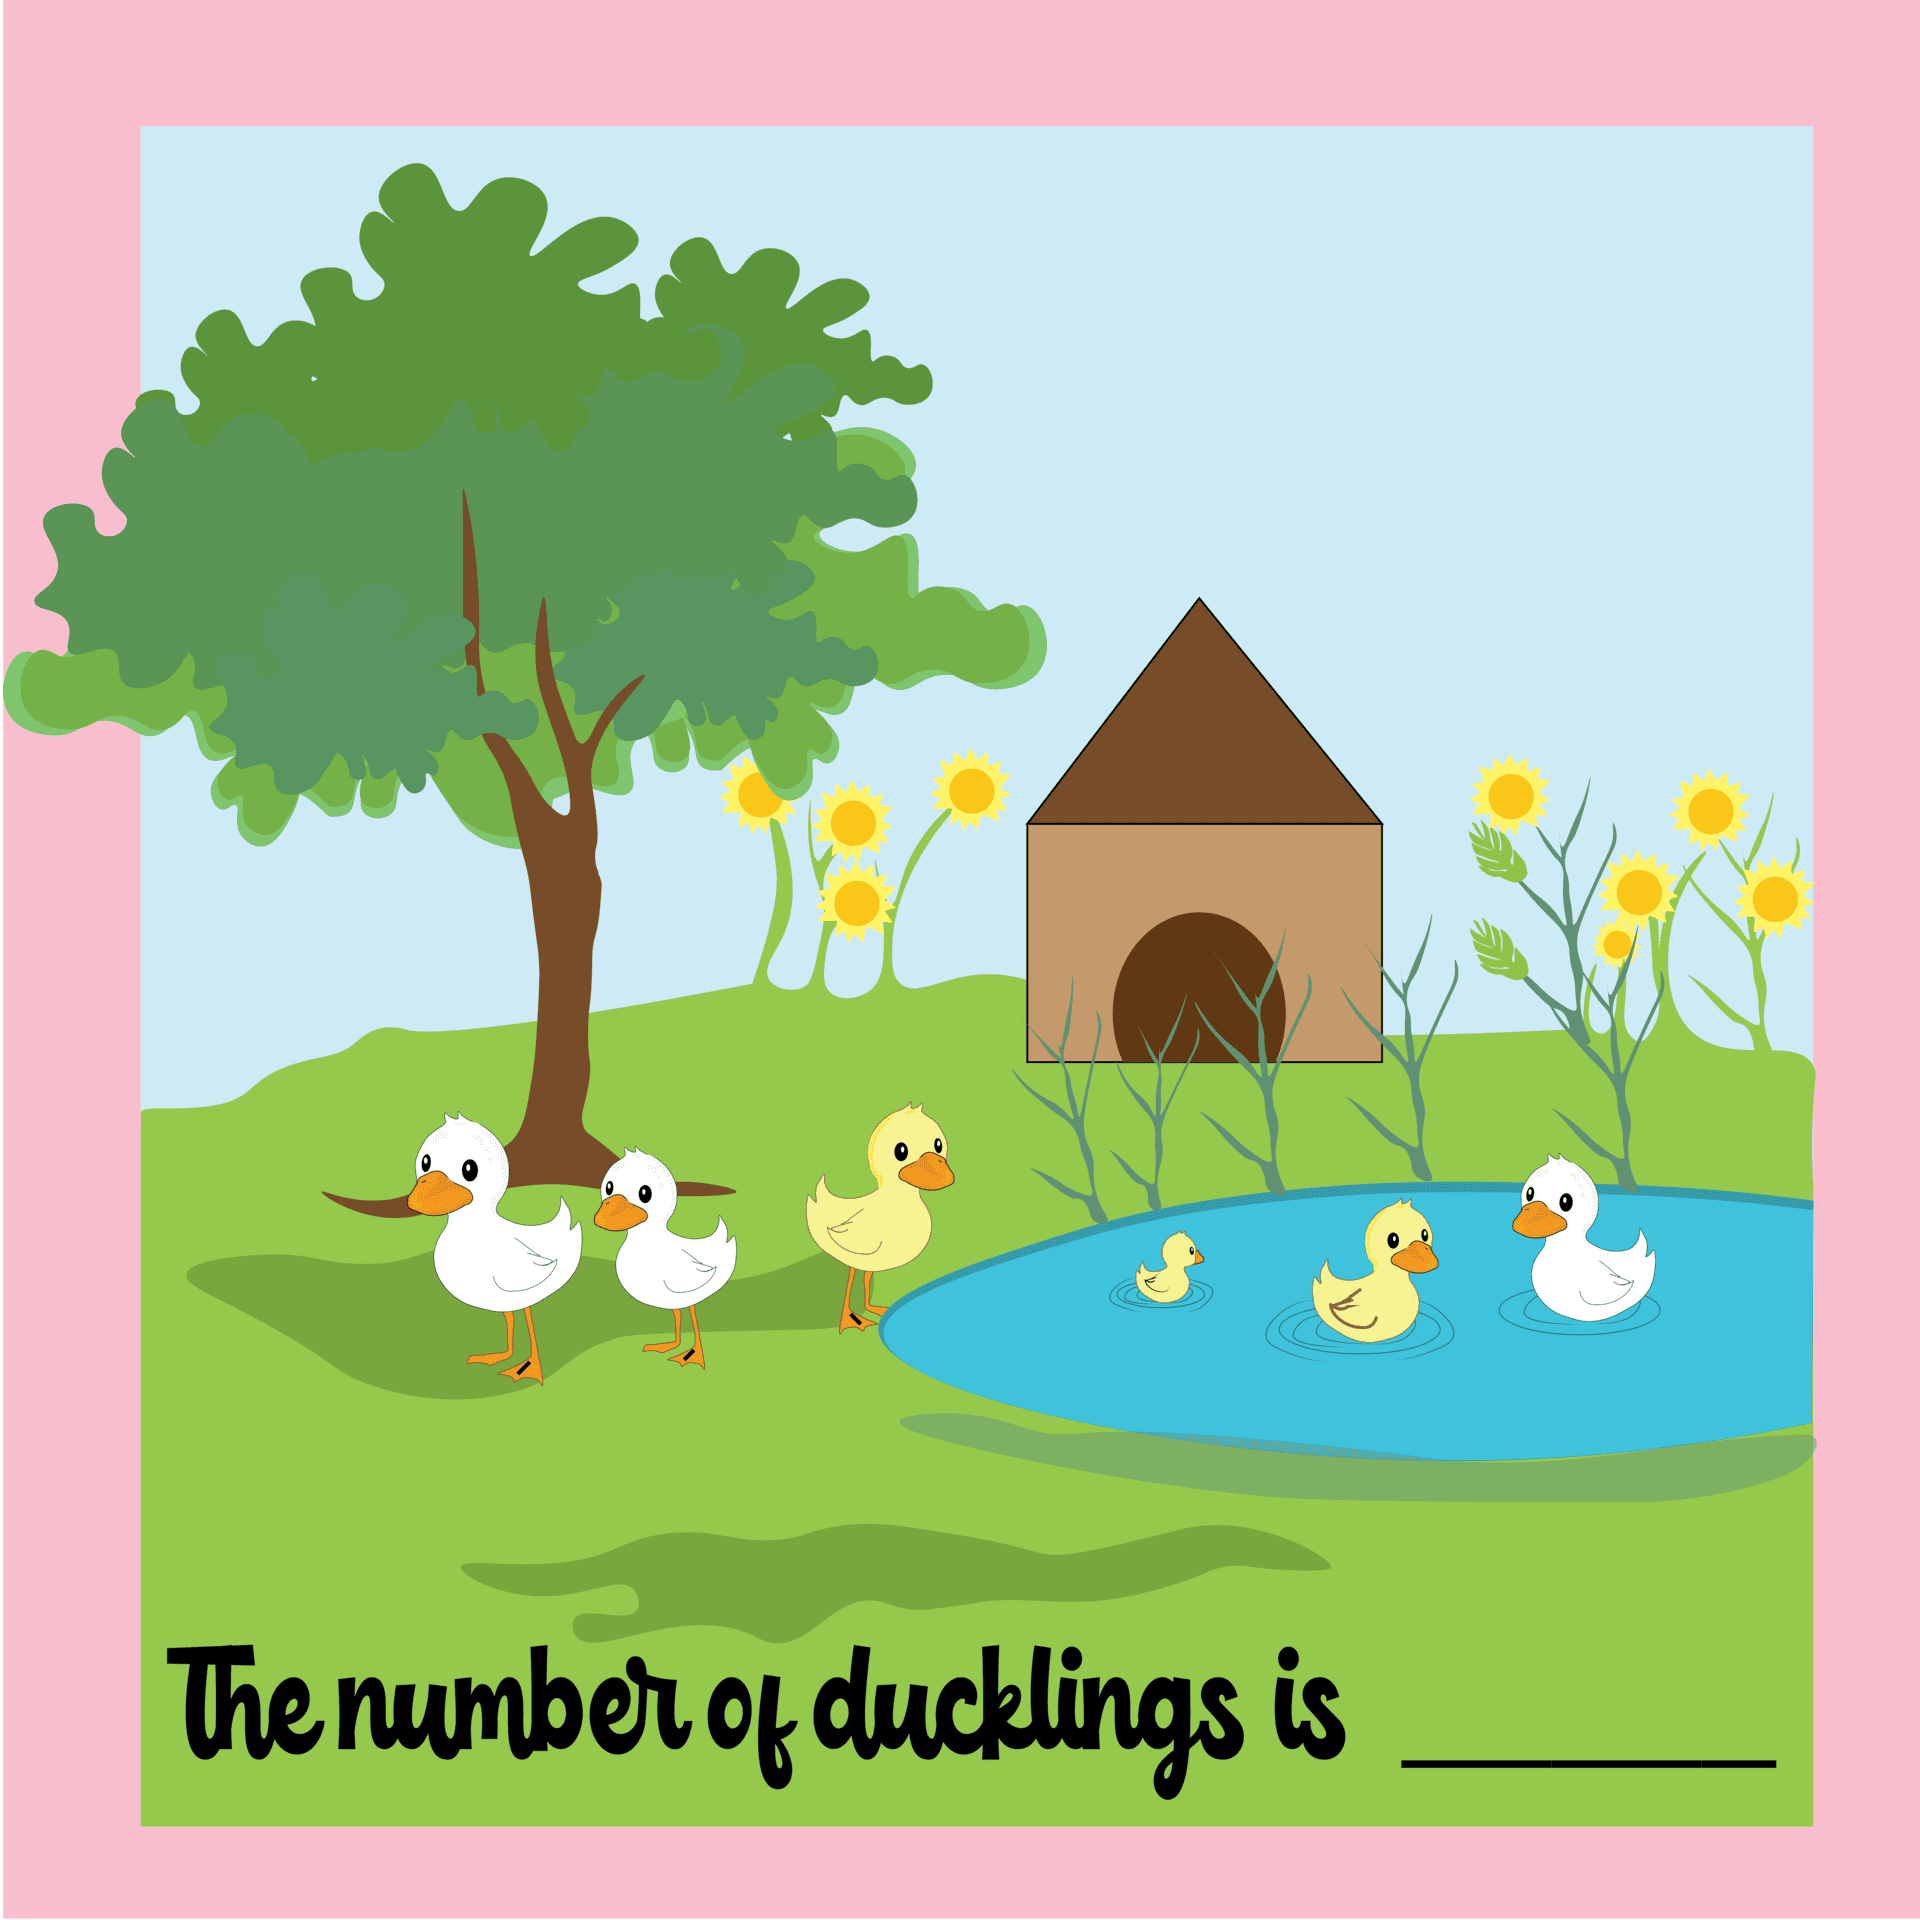 Taking the Ducklings to Their Nest after Counting